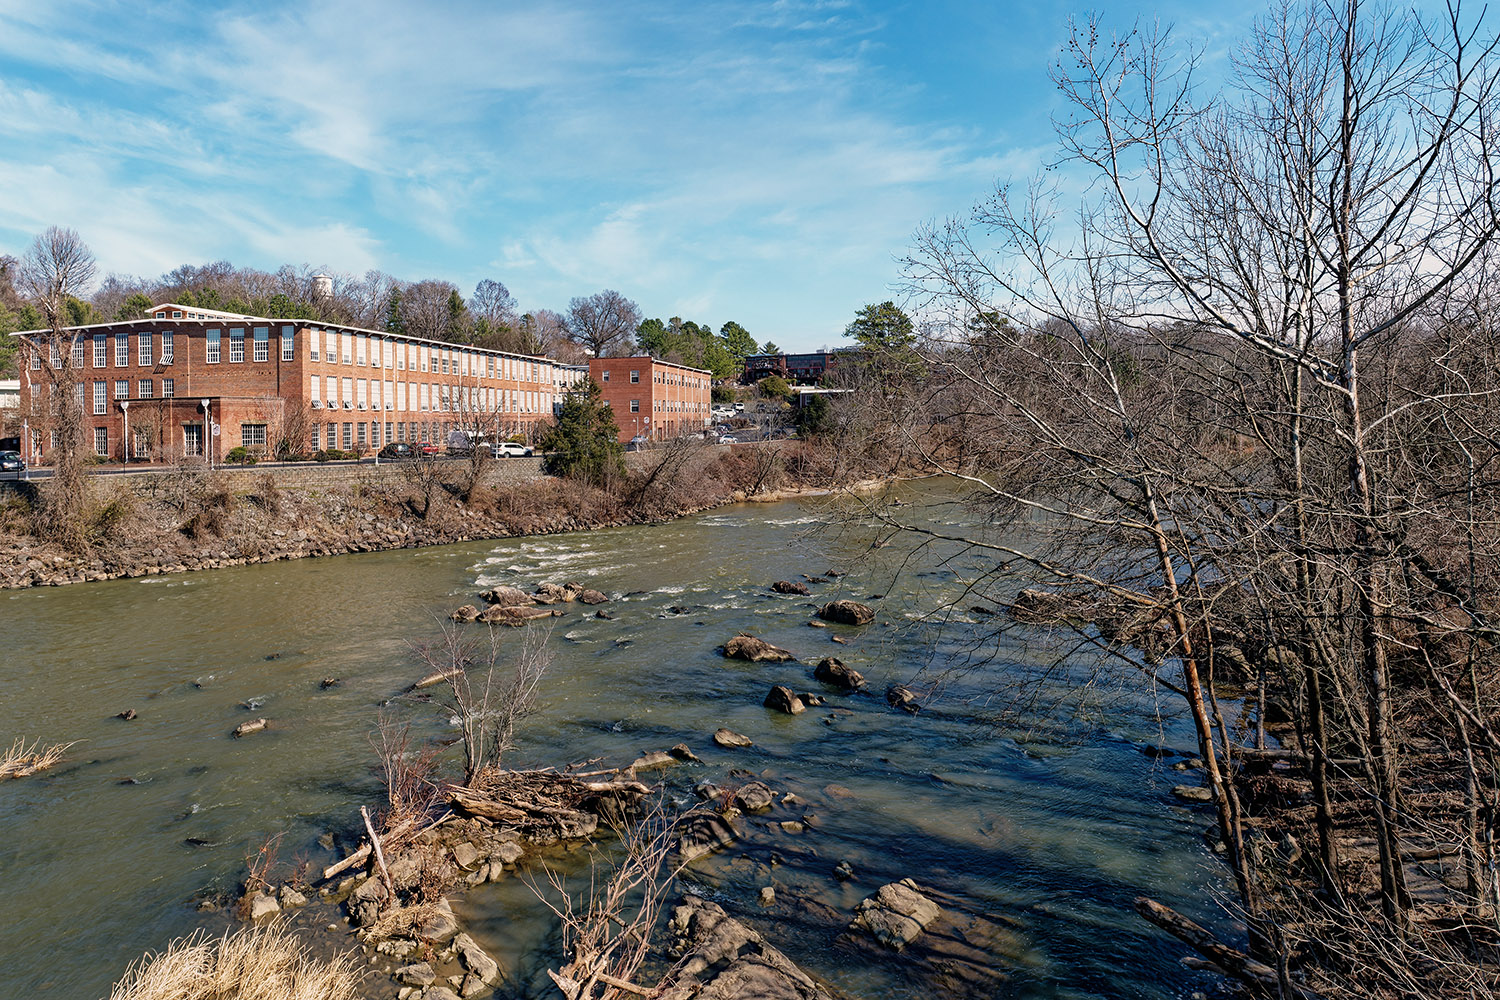 Looking across the Haw River to the former Saxapahaw Spinning Mill